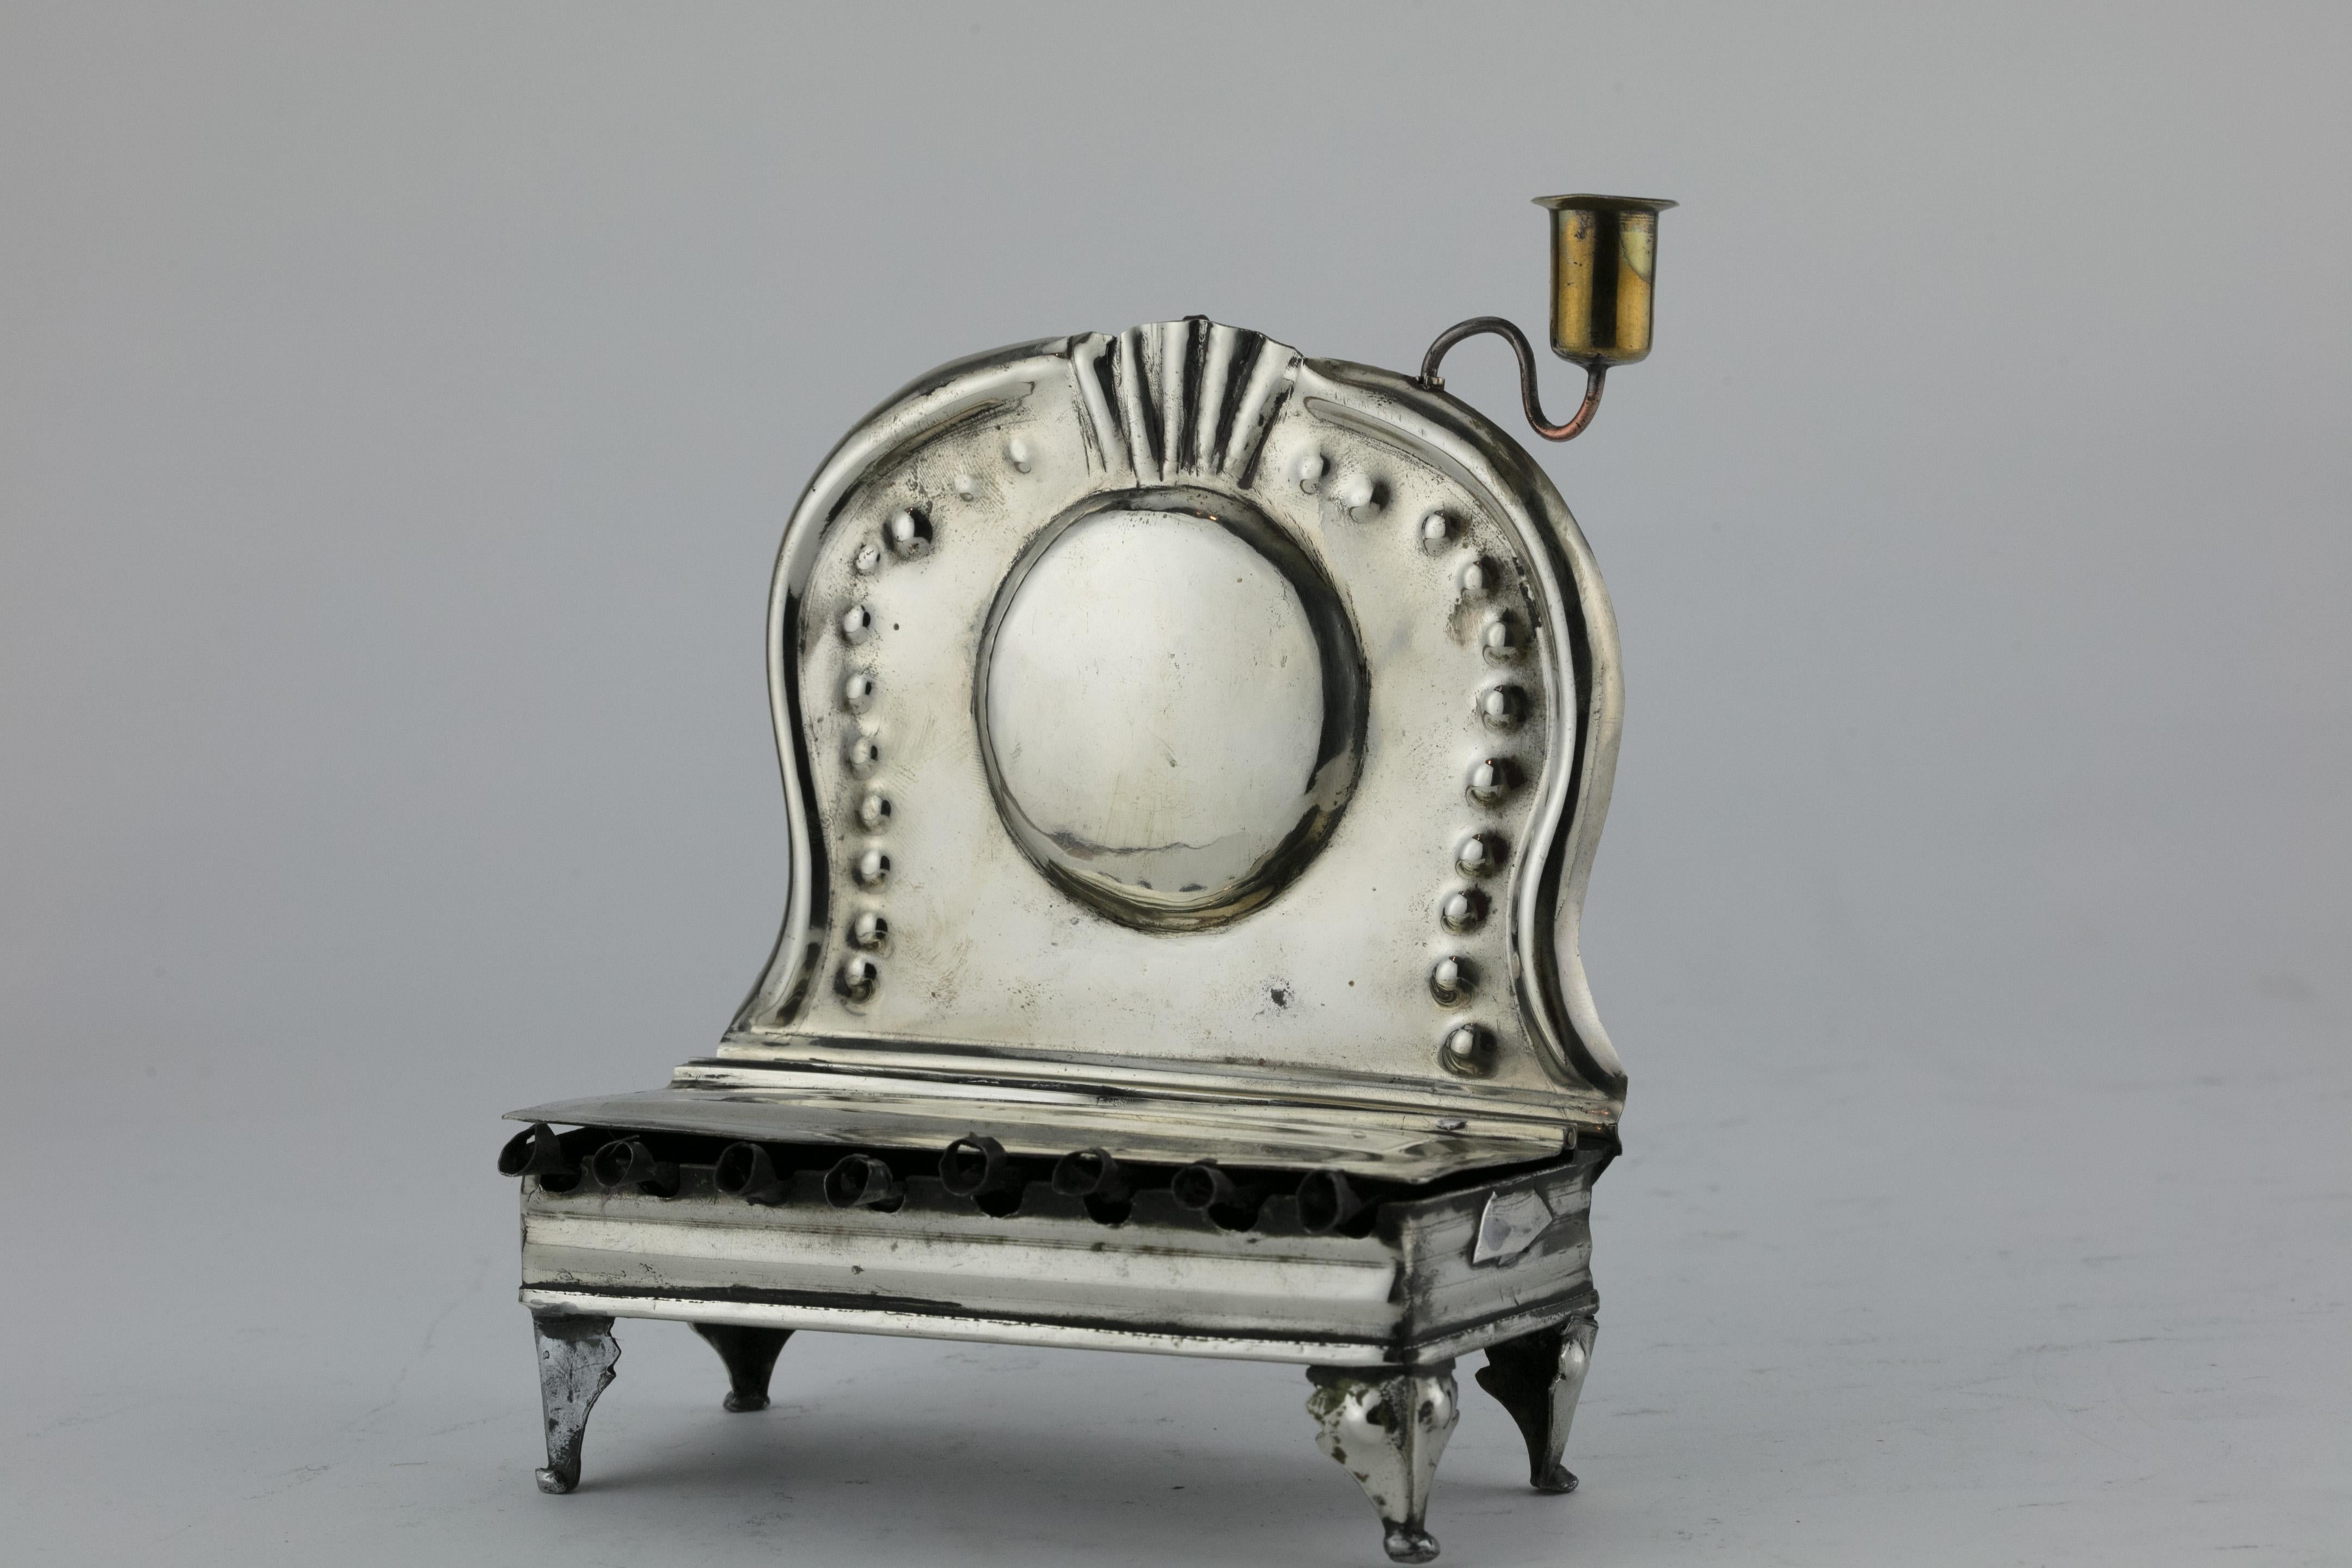 Handmade silver plated brass Hanukkah Lamp, the Netherlands, circa 1750.
On four legs in bench form. Fronted with covered oil container, each oil section with hand wrought wick holder. Backplate hammered with reflective panel.

Every item in Menorah